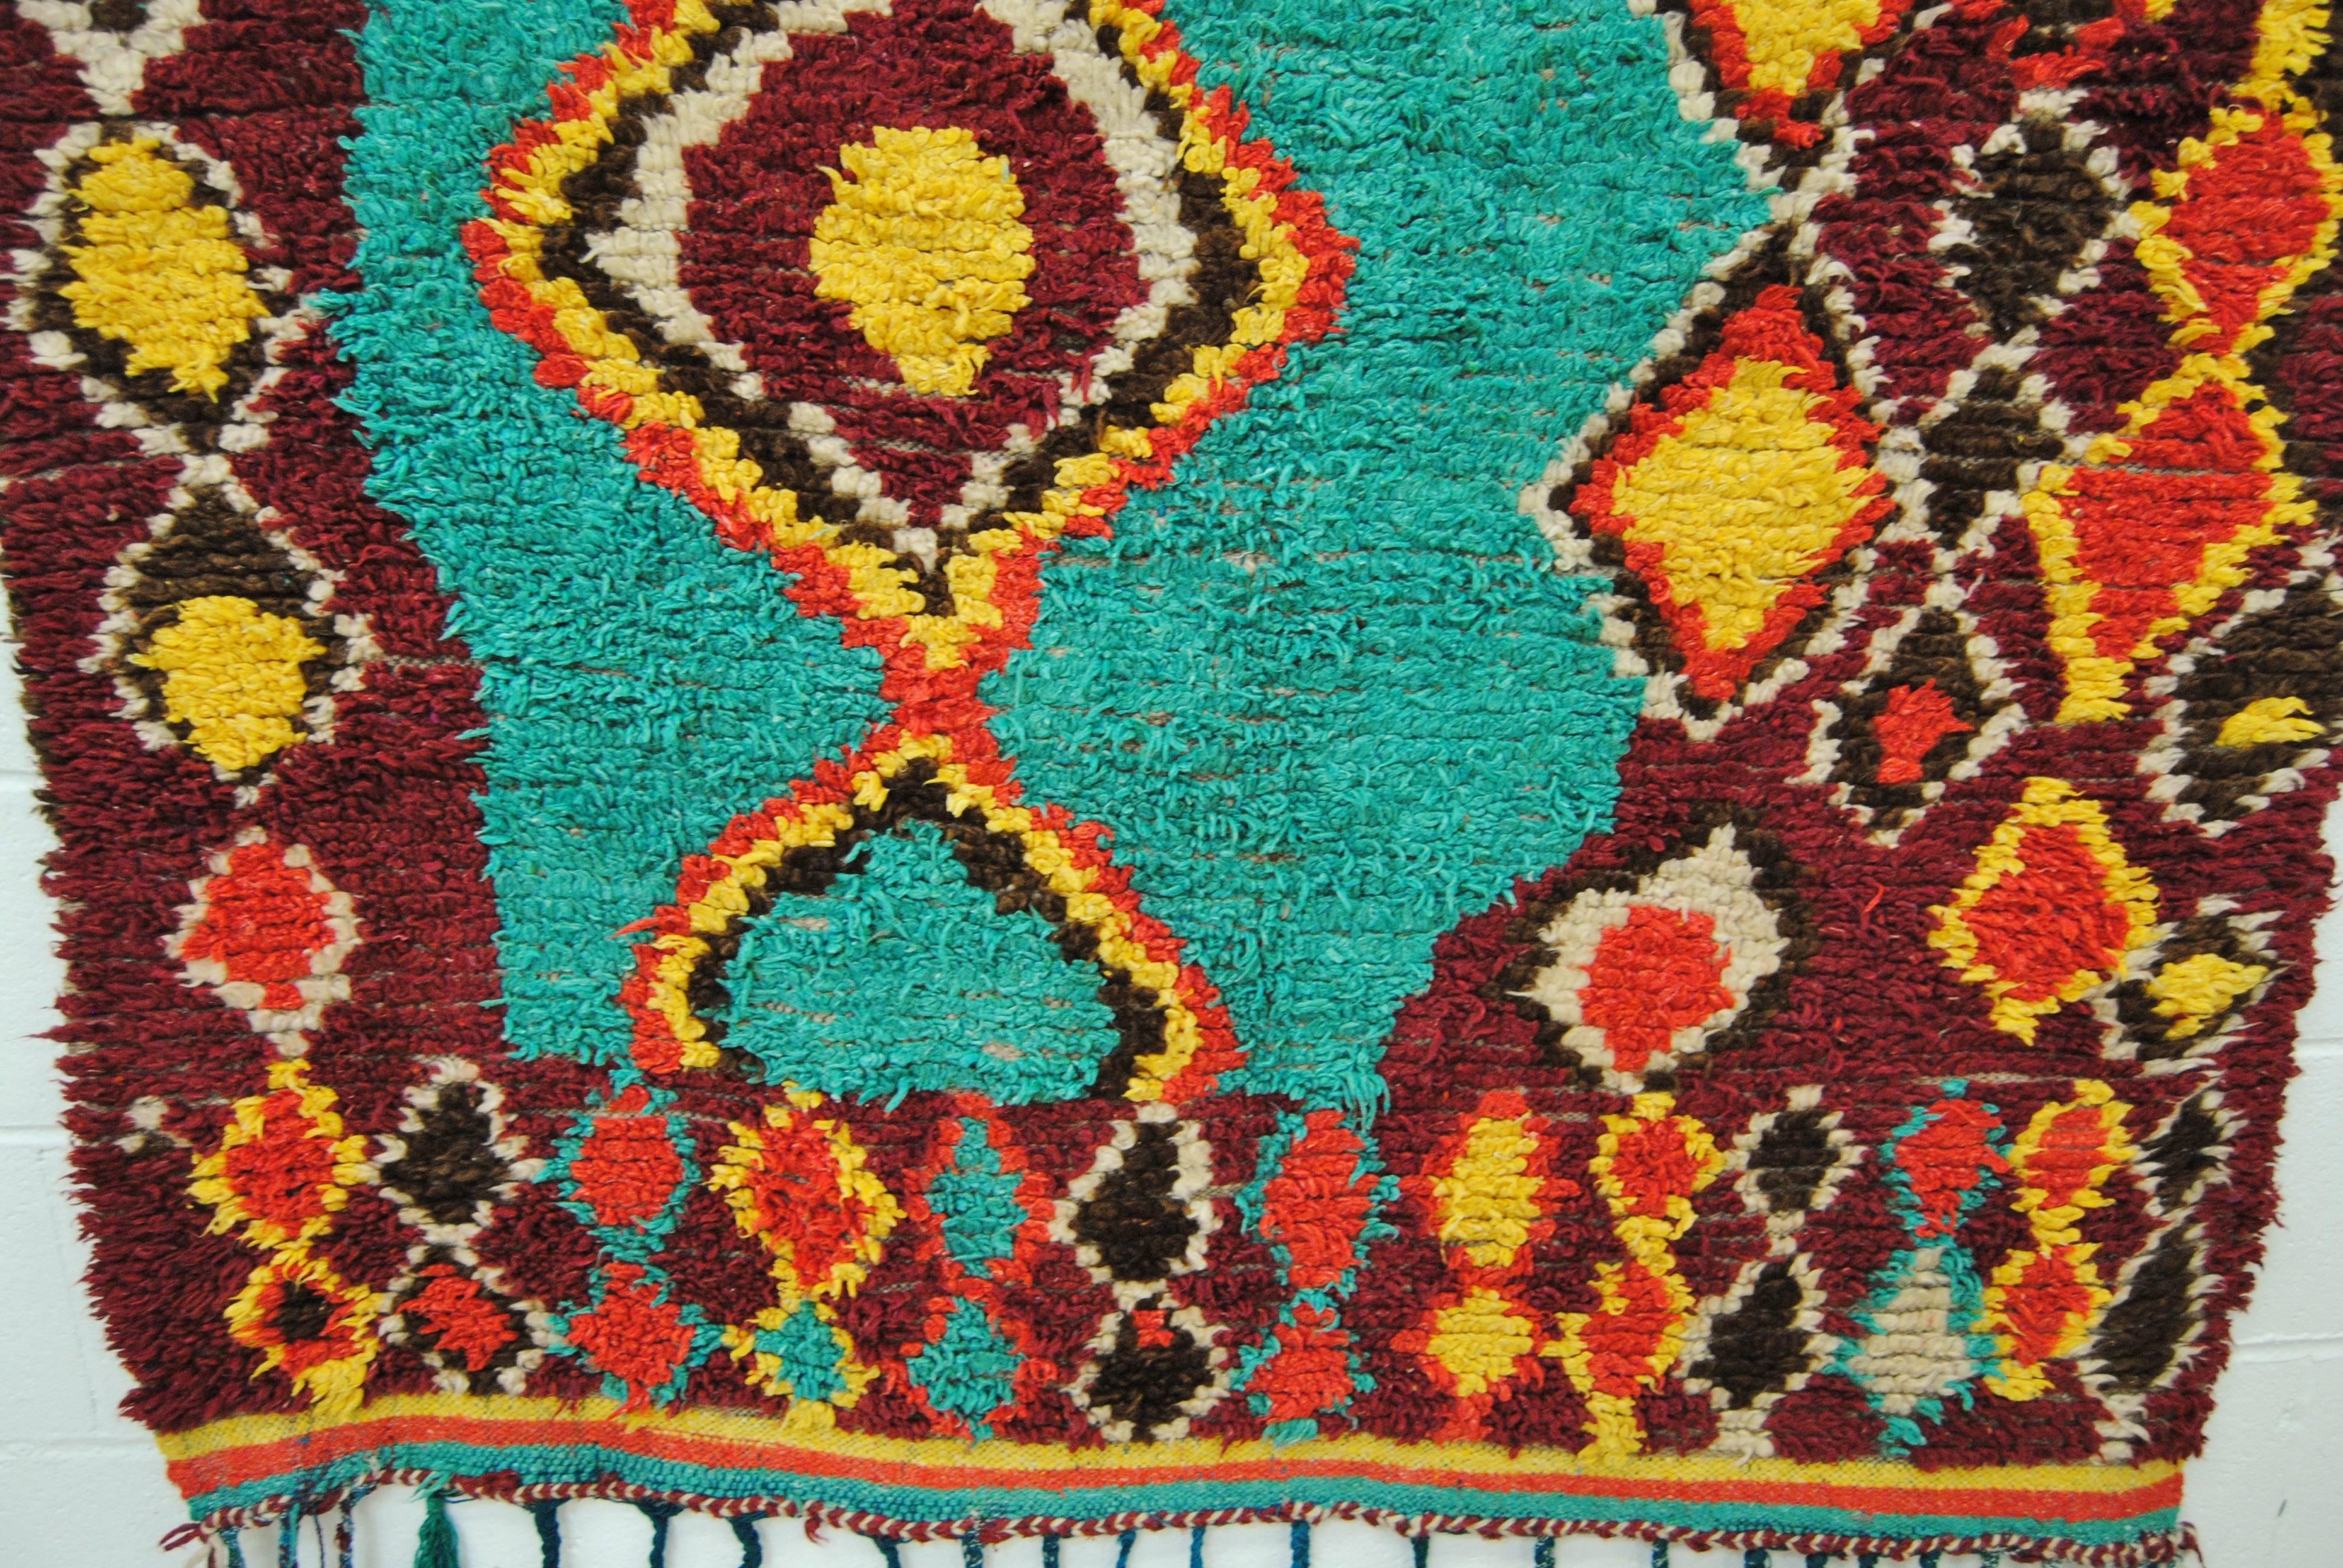 Vintage Moroccan hand-loomed wool Azilal rug made by the Berber women of the Atlas Mountains. Vibrant, rich color with tribal motifs. Very little wear.